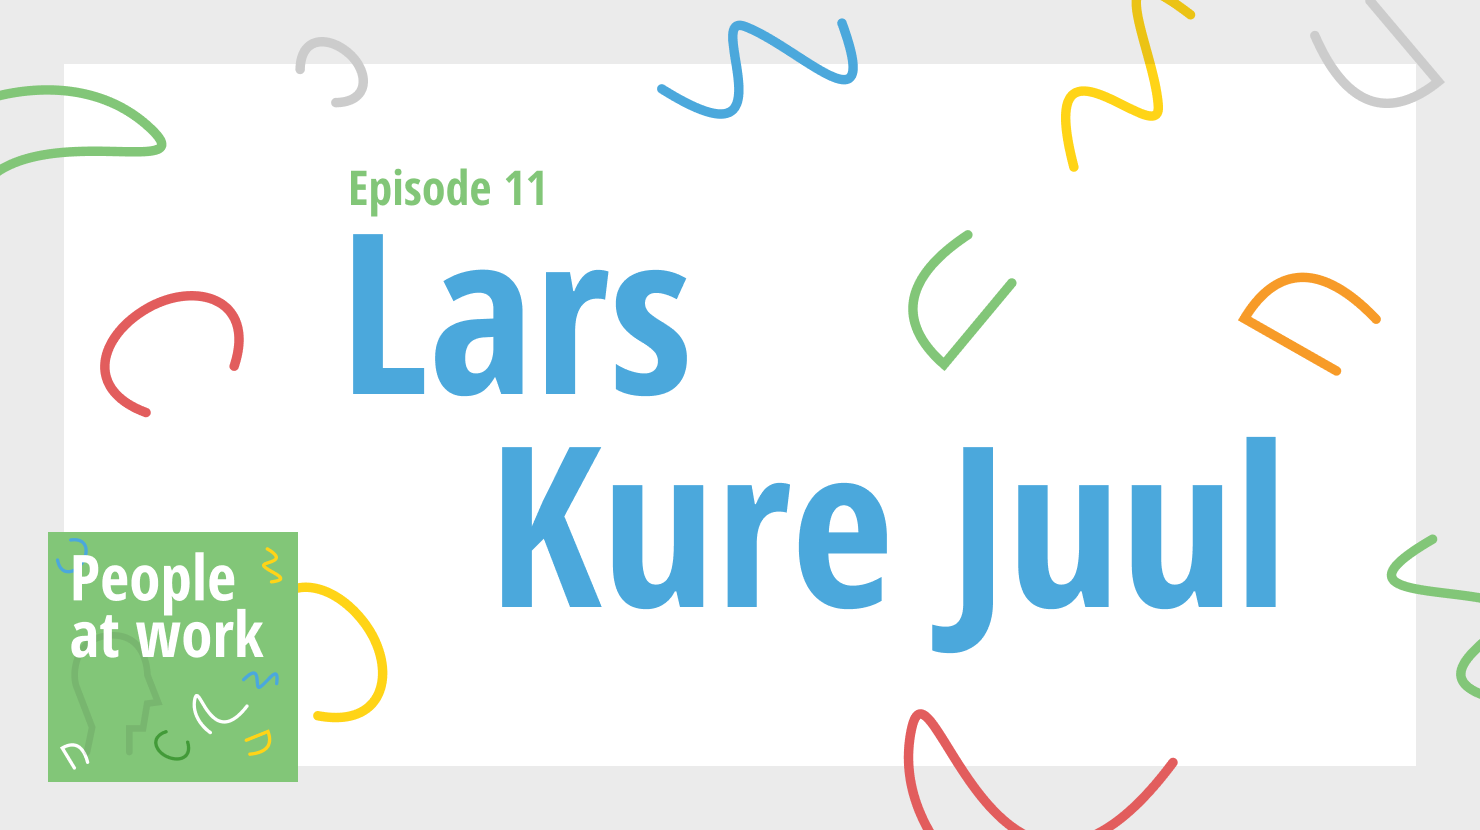 Lars Kure Juul on how to hit the happiness sweet spot